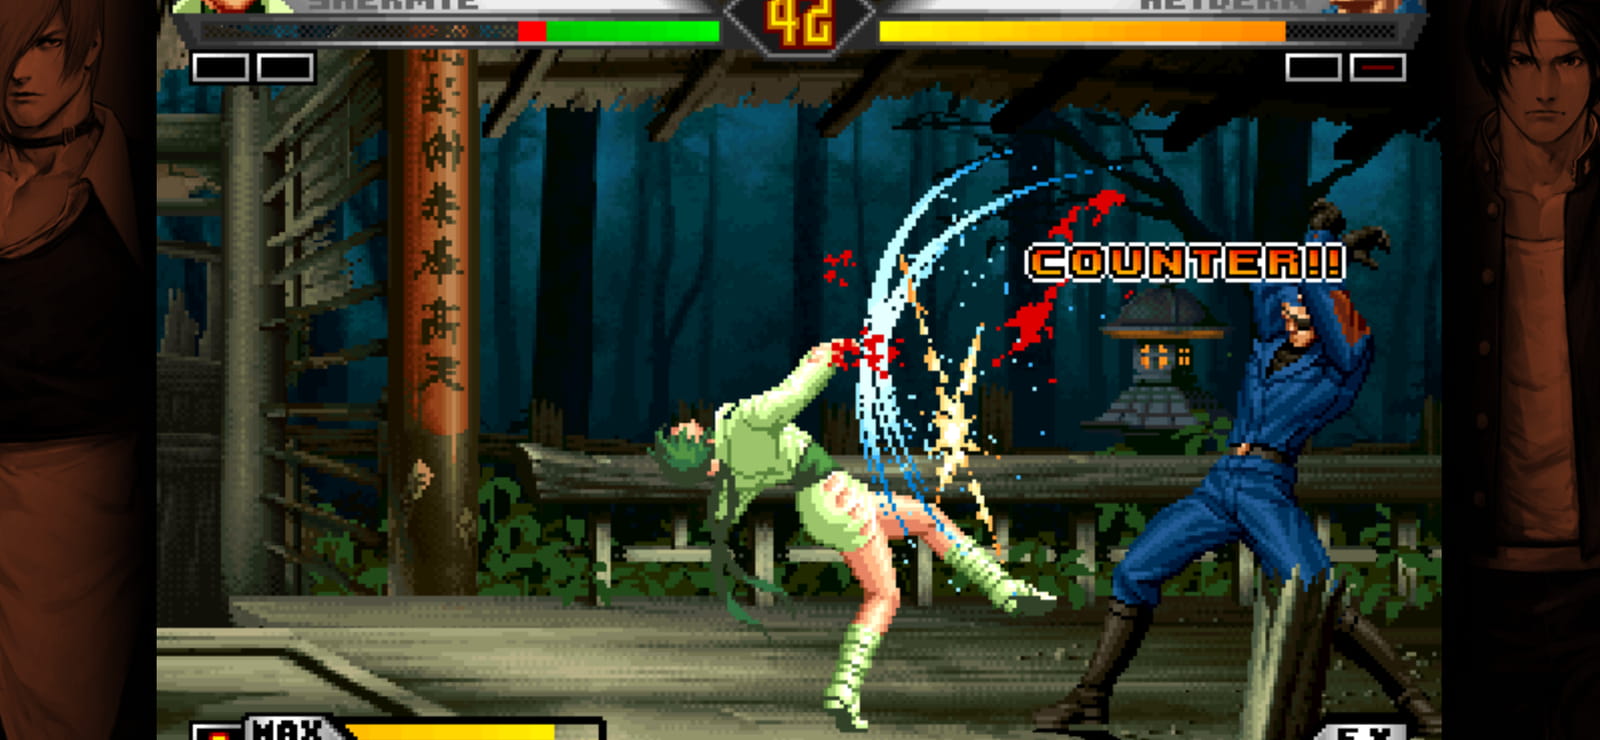 THE KING OF FIGHTERS '98 ULTIMATE MATCH FINAL EDITION